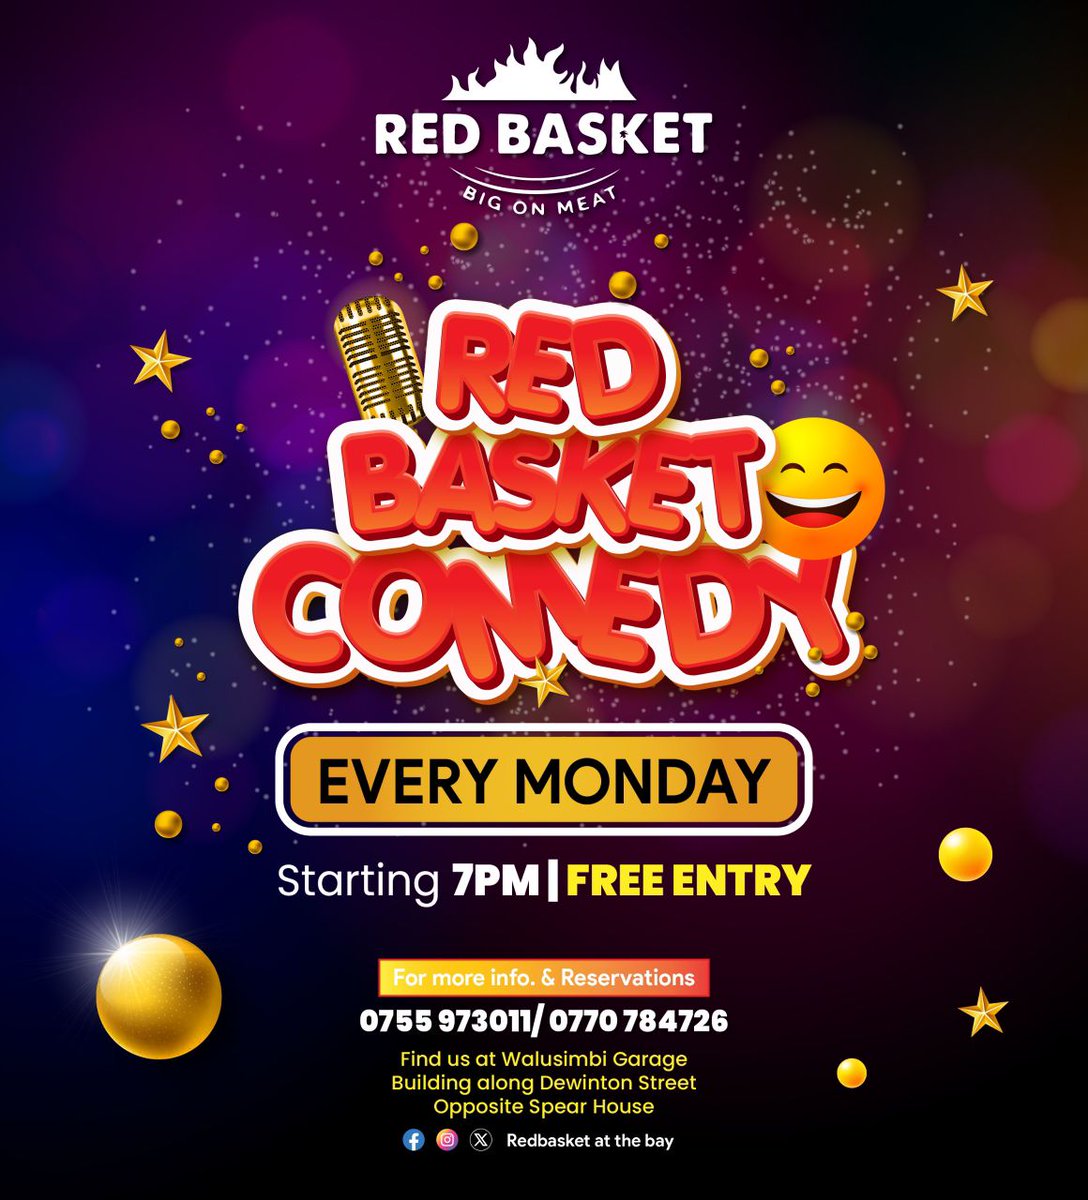 The funny is at Red Basket tonight. Dewinton Rise near National Theater